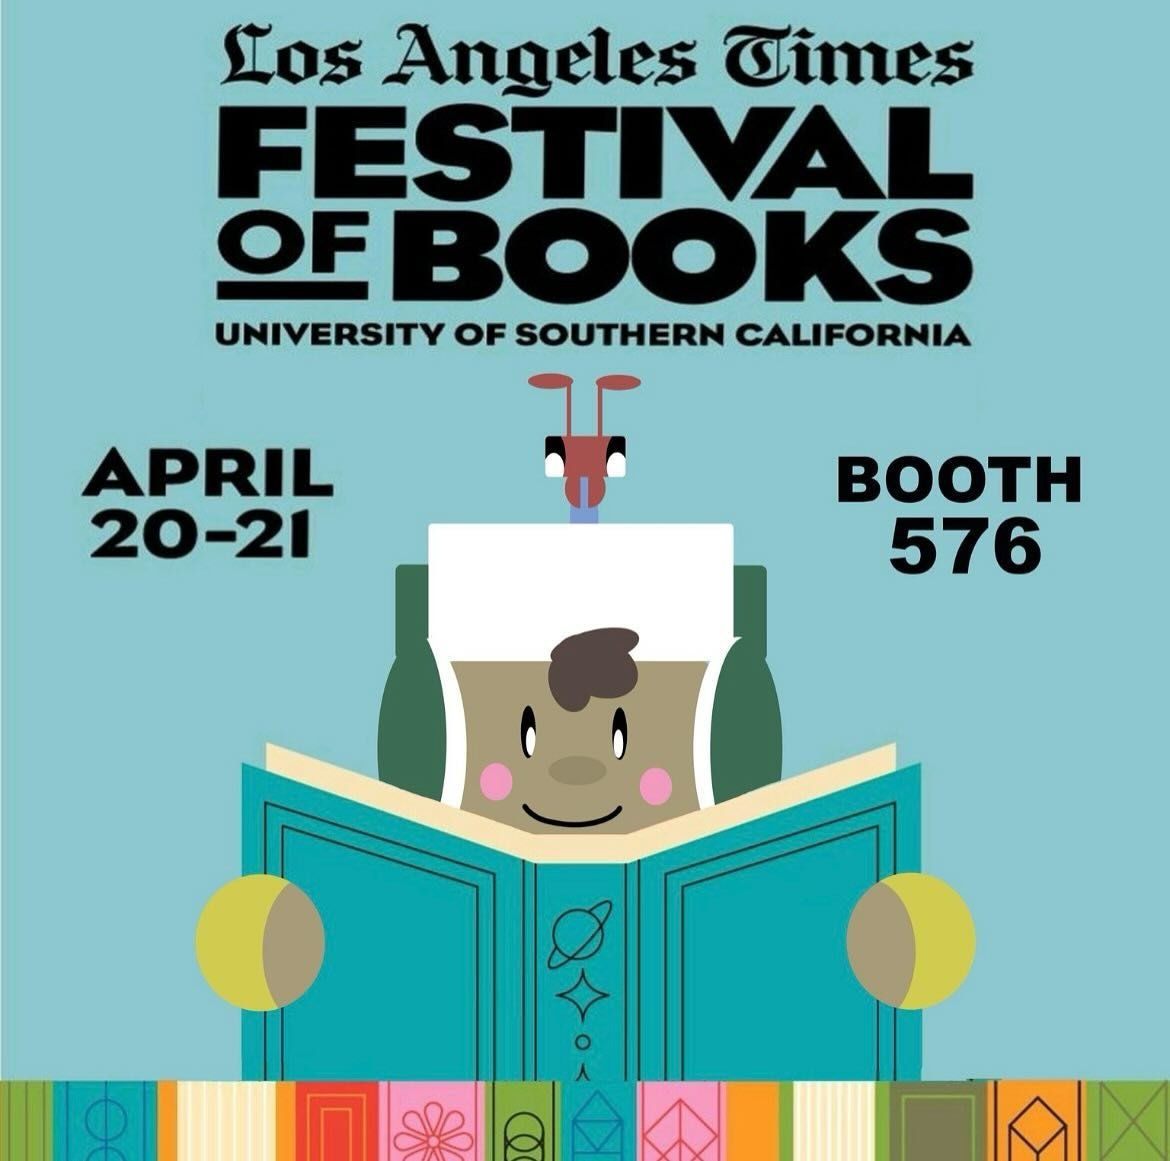 Very excited to be returning to @latimesfob this weekend. This is one of my favorite events of the year so I hope y&rsquo;all will come out and join us. 

#latimesfestivalofbooks #bookfestival #bookseller #freeevent #usccampus #bookfair #thisweekend